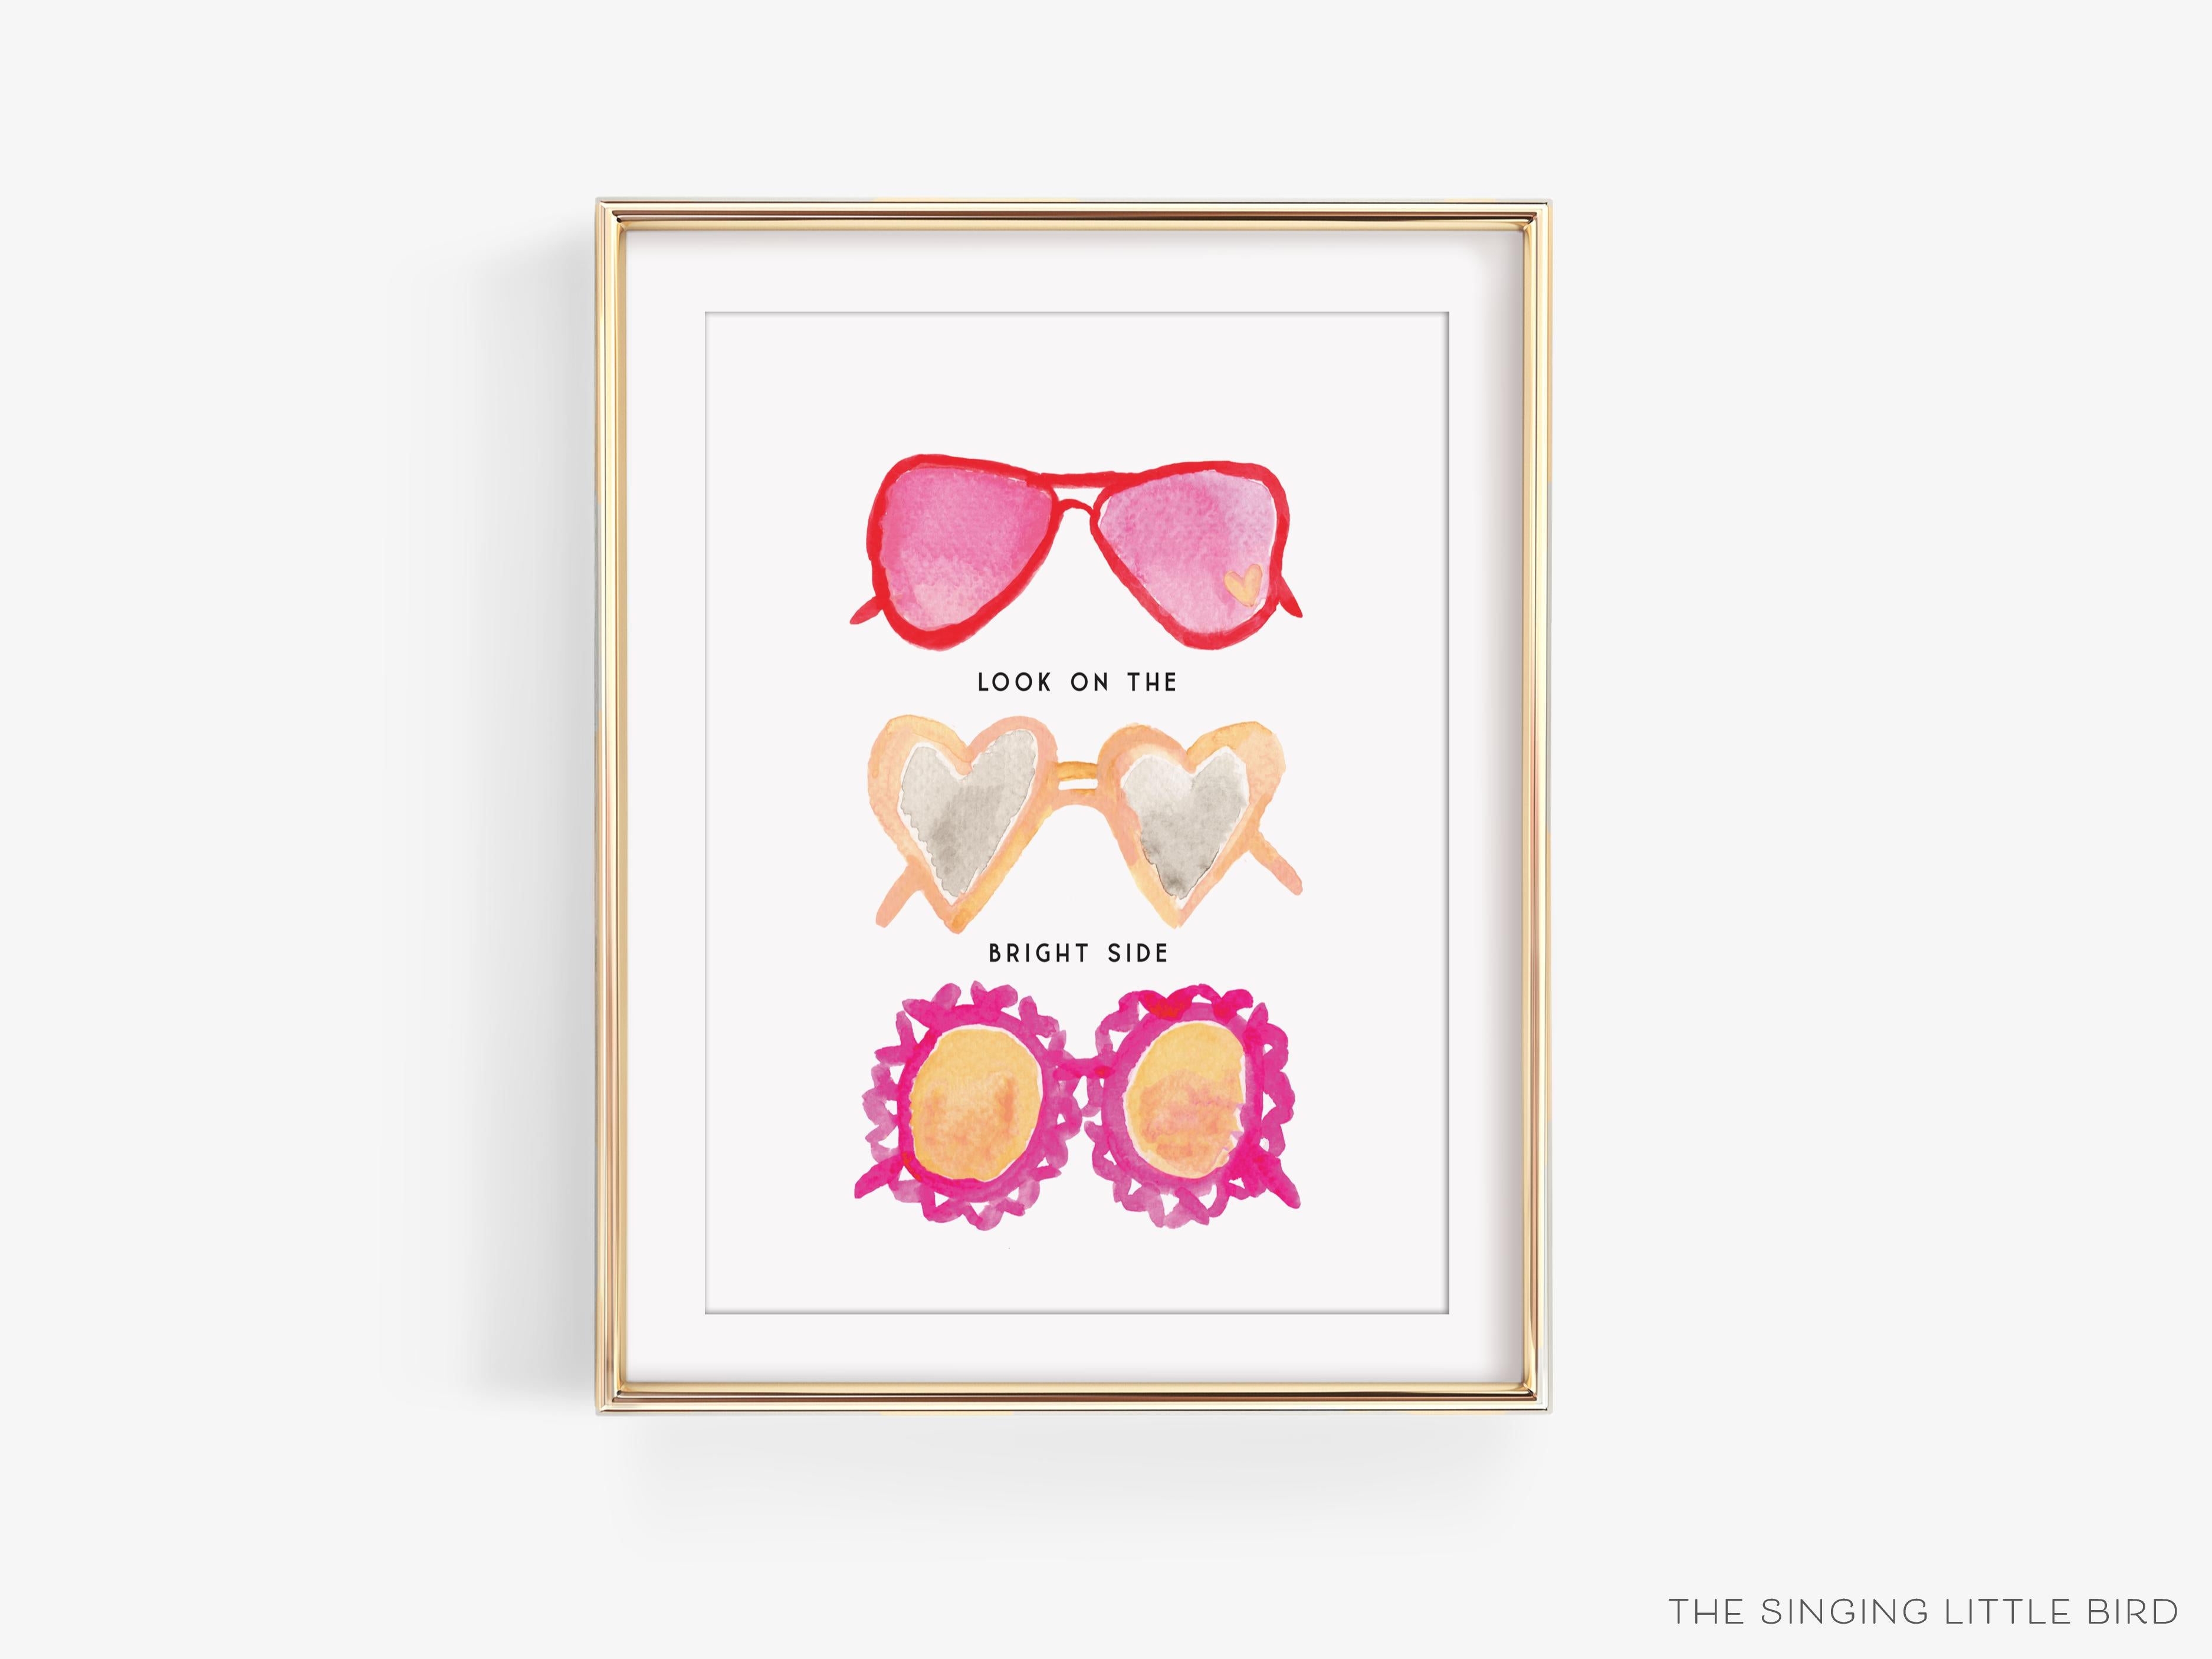 Look on the Bright Side Heart Glasses Art Print-This watercolor art print features our hand-painted sunglasses, printed in the USA on 120lb high quality art paper. This makes a great gift or wall decor for the sunny lover in your life.-The Singing Little Bird